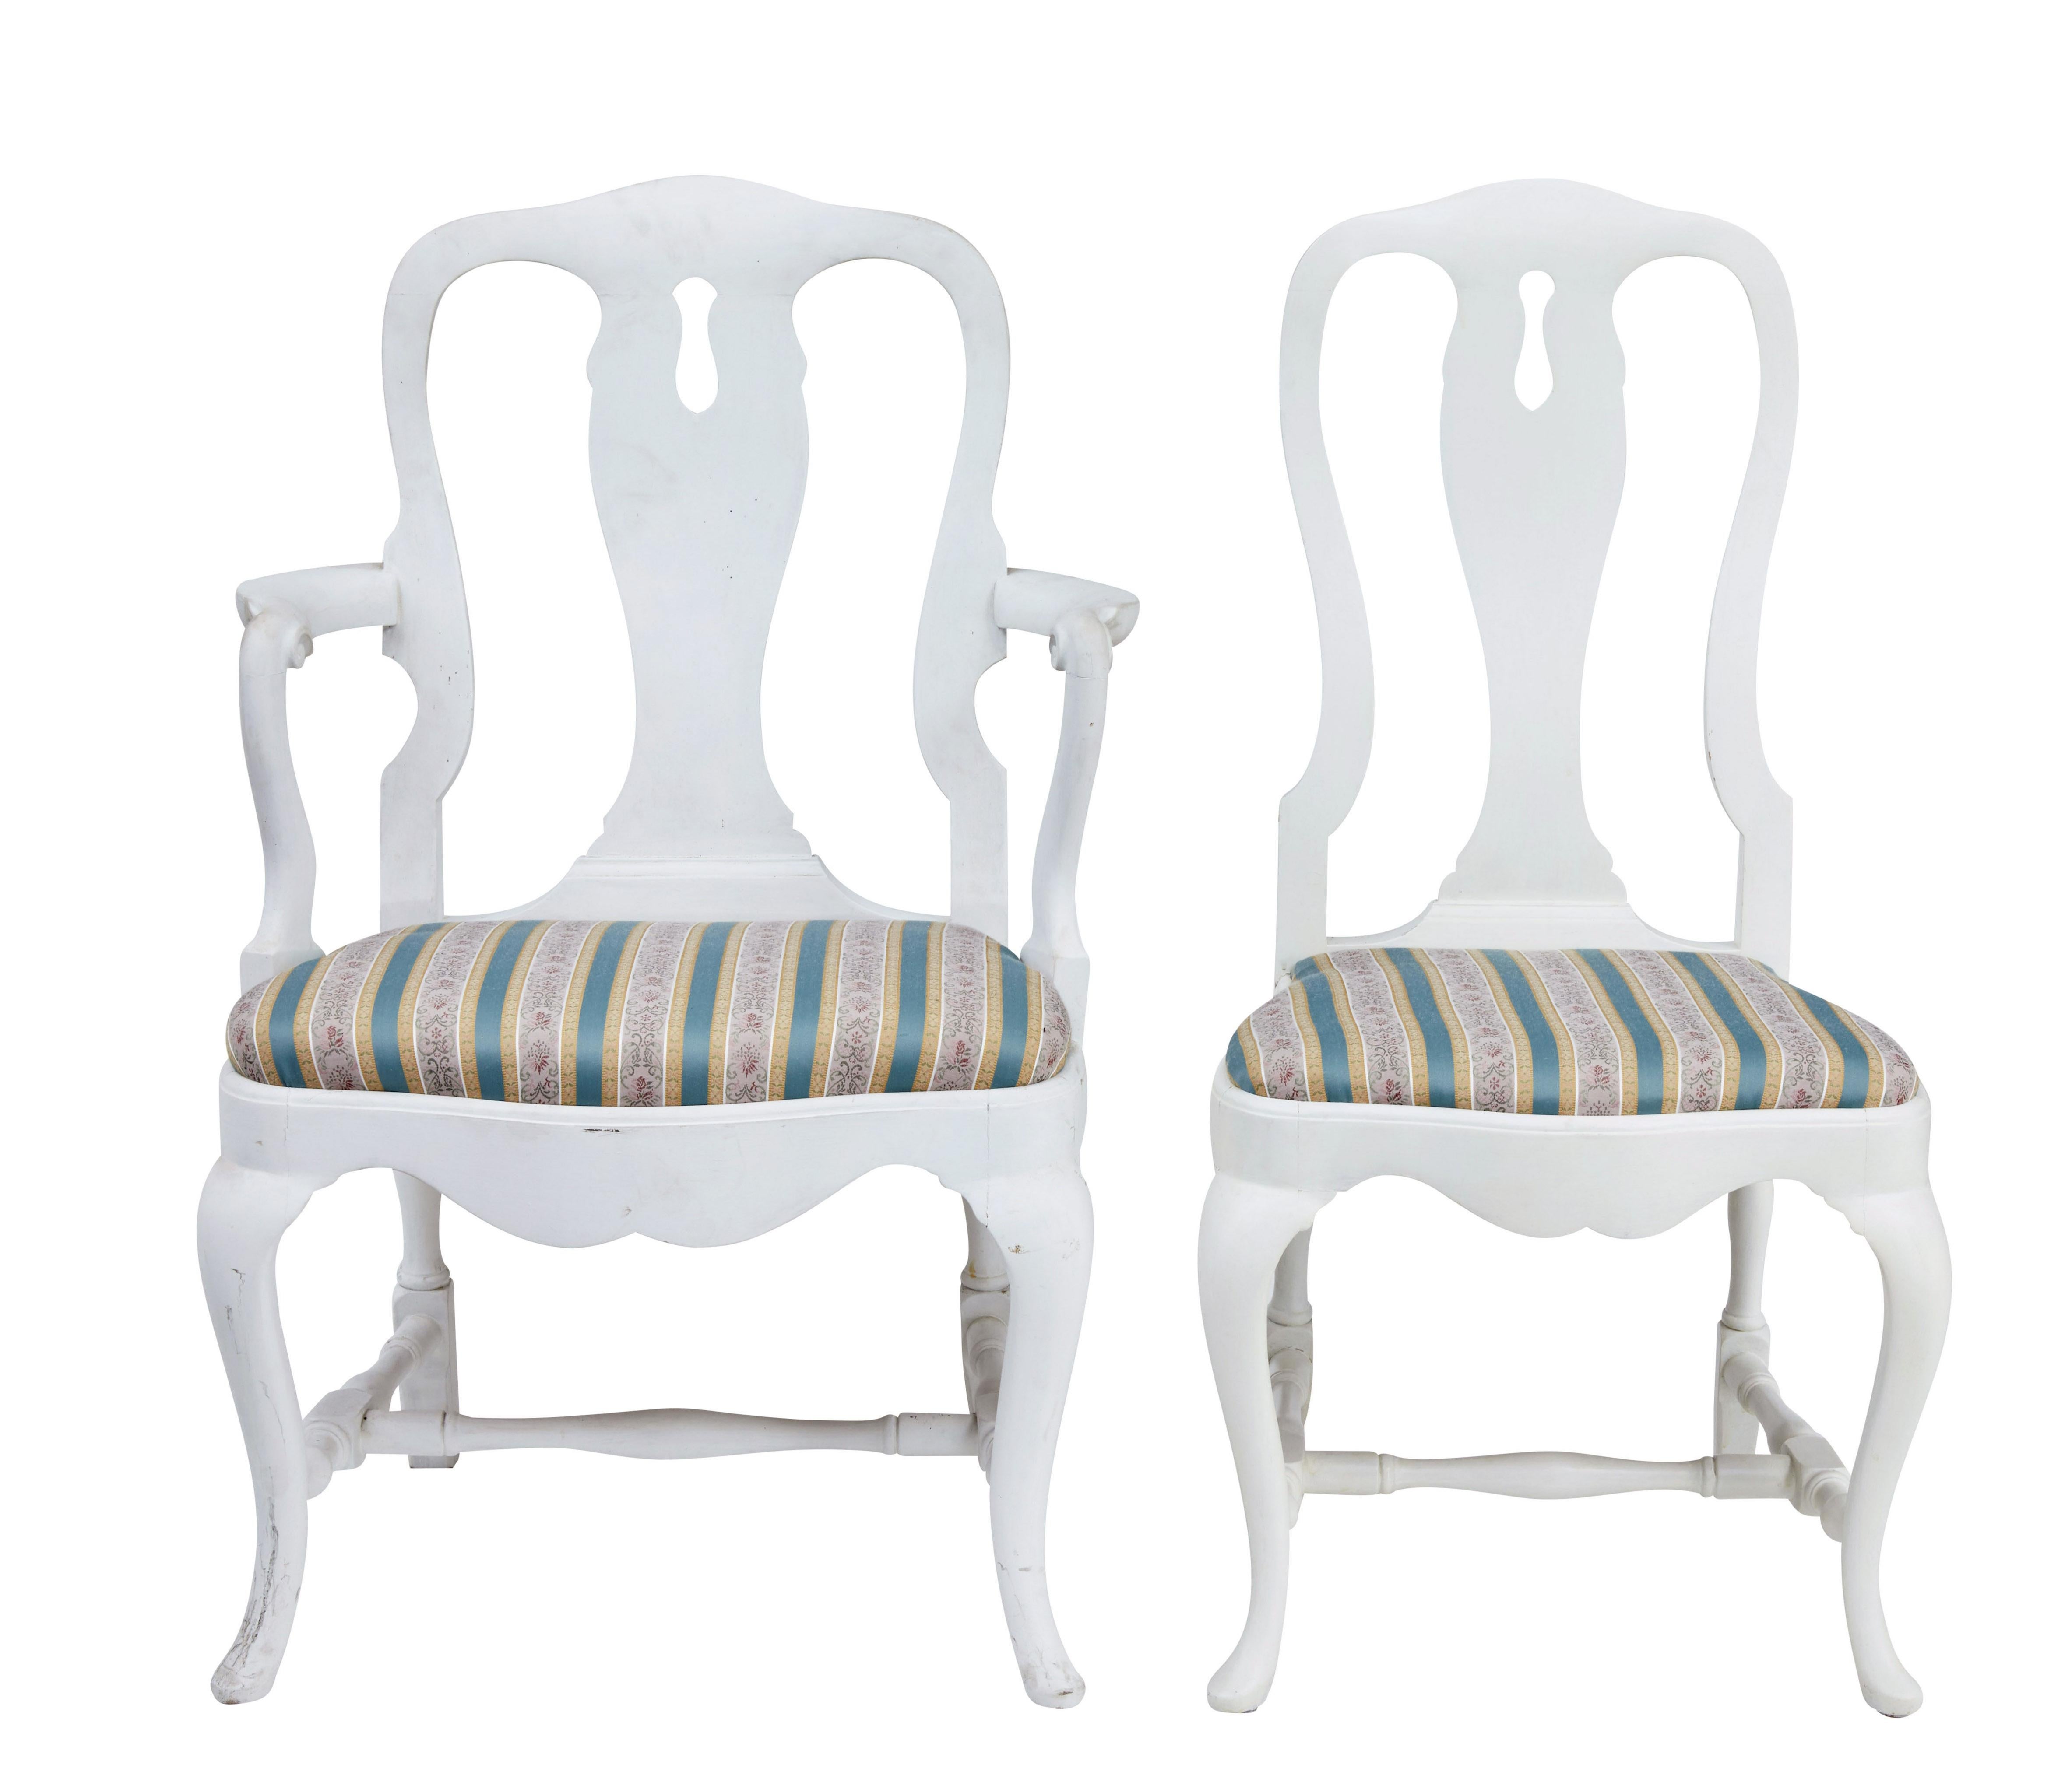 Set of 14 1920's Queen Anne design dining chairs circa 1920.

Set comprises of 12 single chairs and 2 carver armchairs.  Made in beech and later painted white.

Shaped Queen Anne design backs, with drop in seats which are in good usable